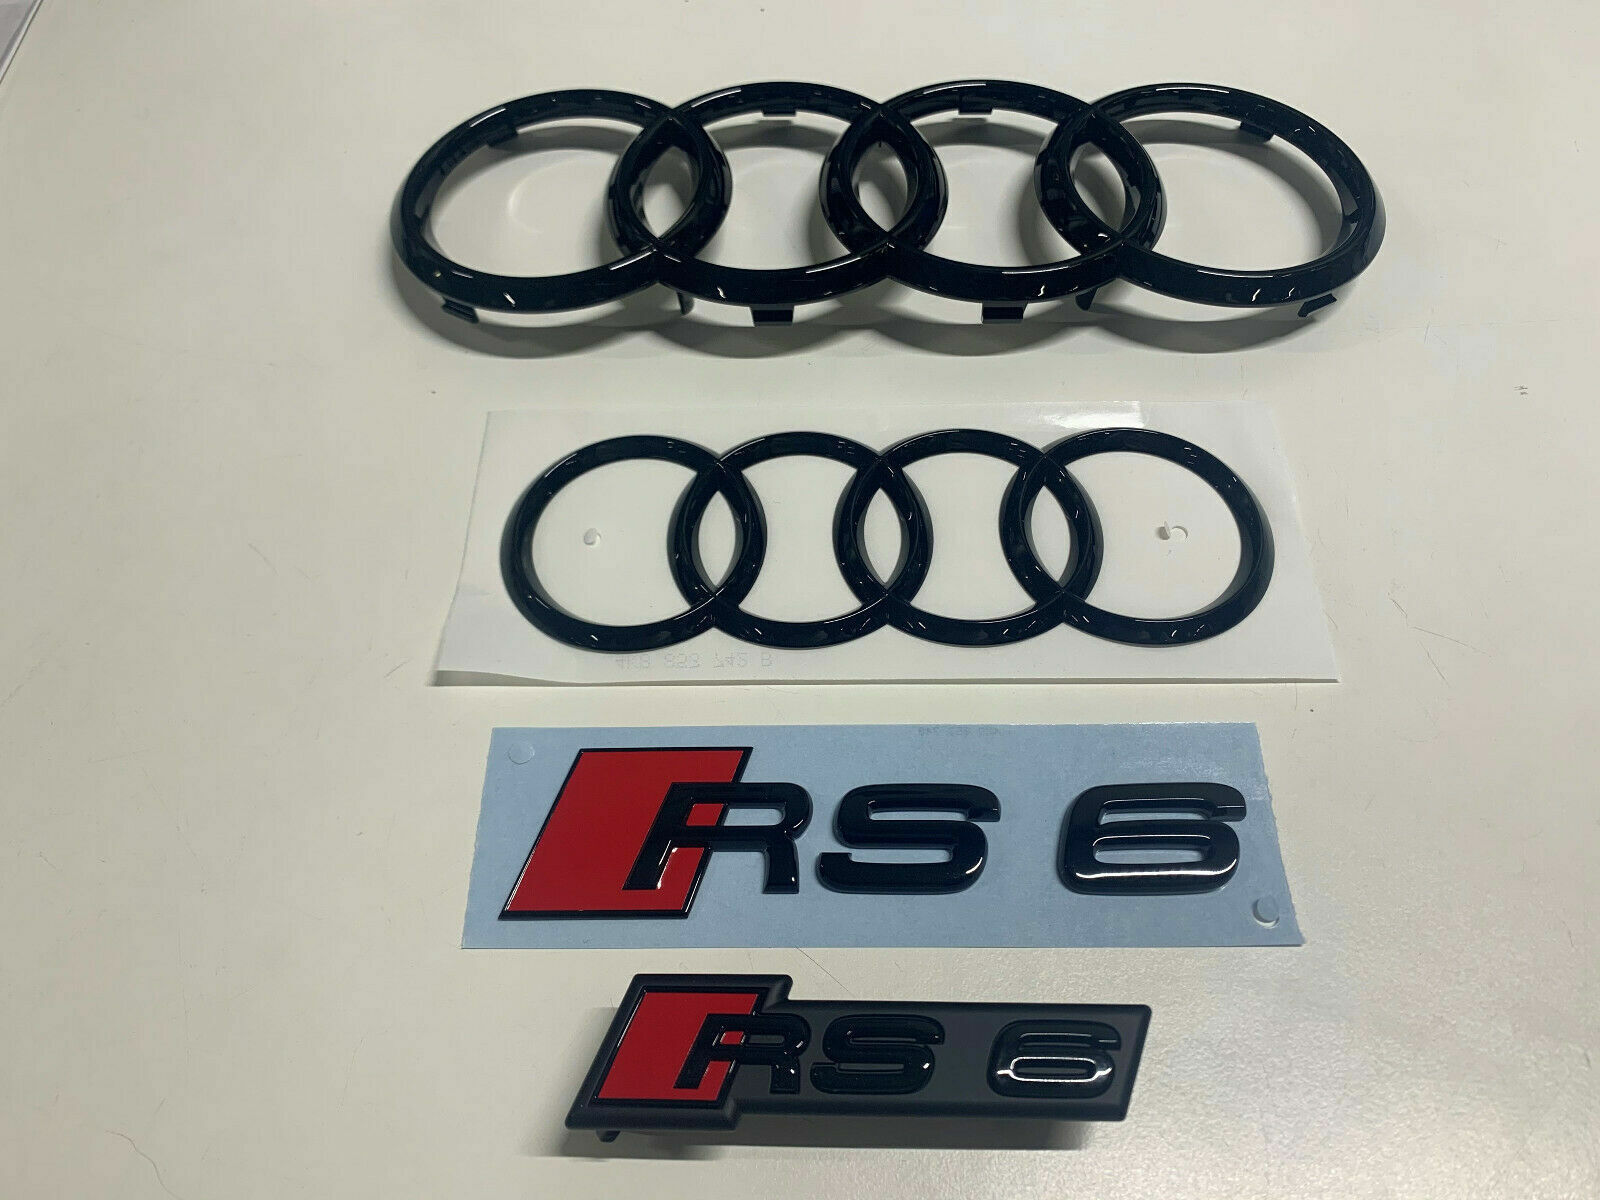 Audi RS6 Audi Rings Front Rear And Emblems Type Designation Black Genuine New